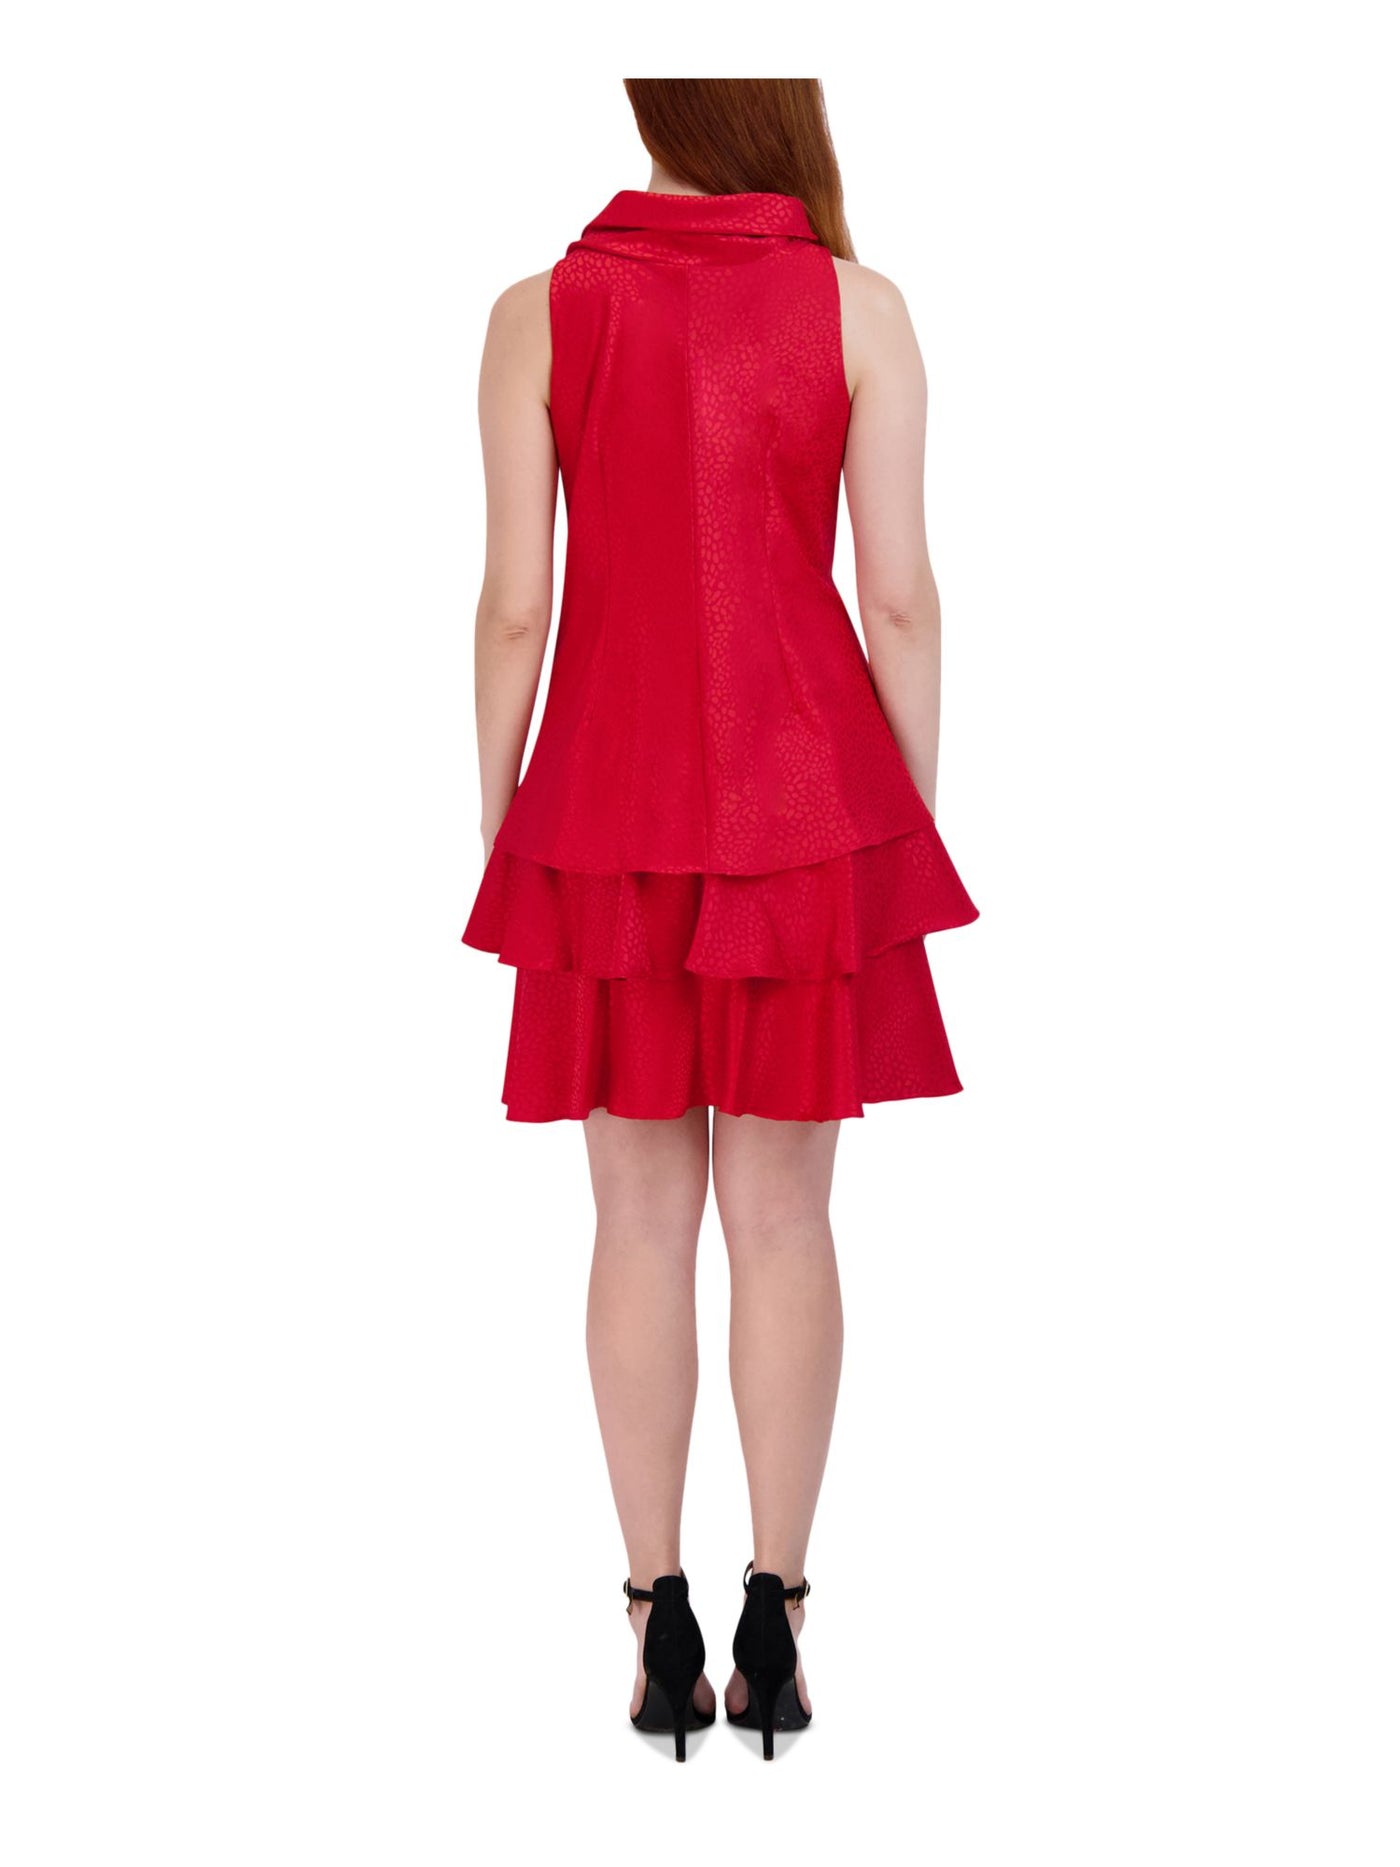 SIGNATURE BY ROBBIE BEE Womens Red Lined Tiered Hem Pullover Sleeveless Tie Neck Above The Knee Party Trapeze Dress Petites 6P